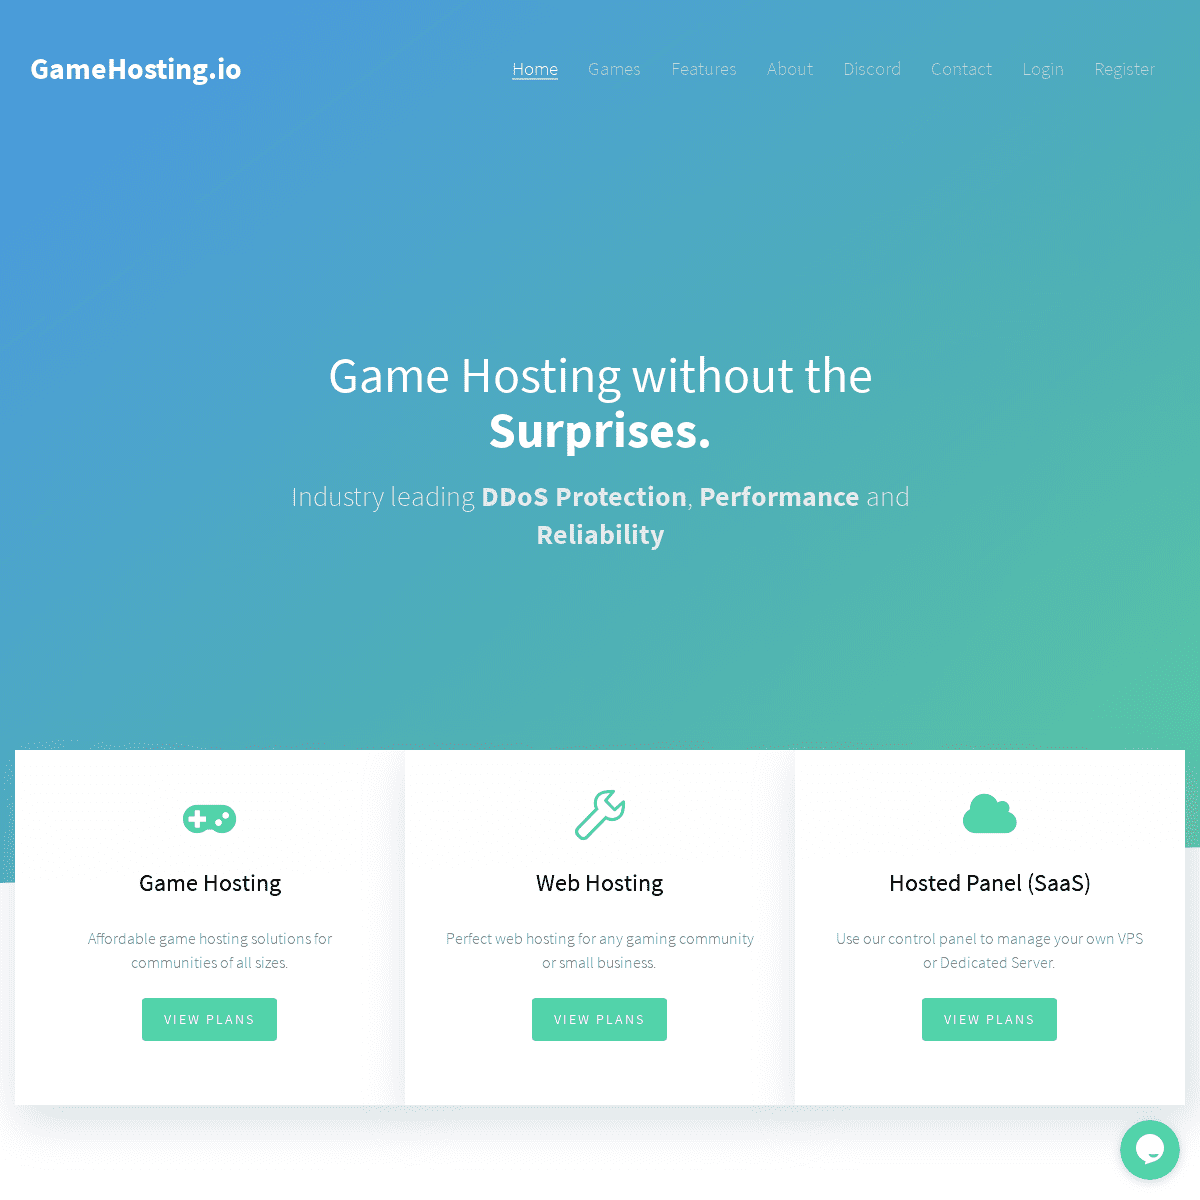 GameHosting.io — Game Hosting, without the surprises.